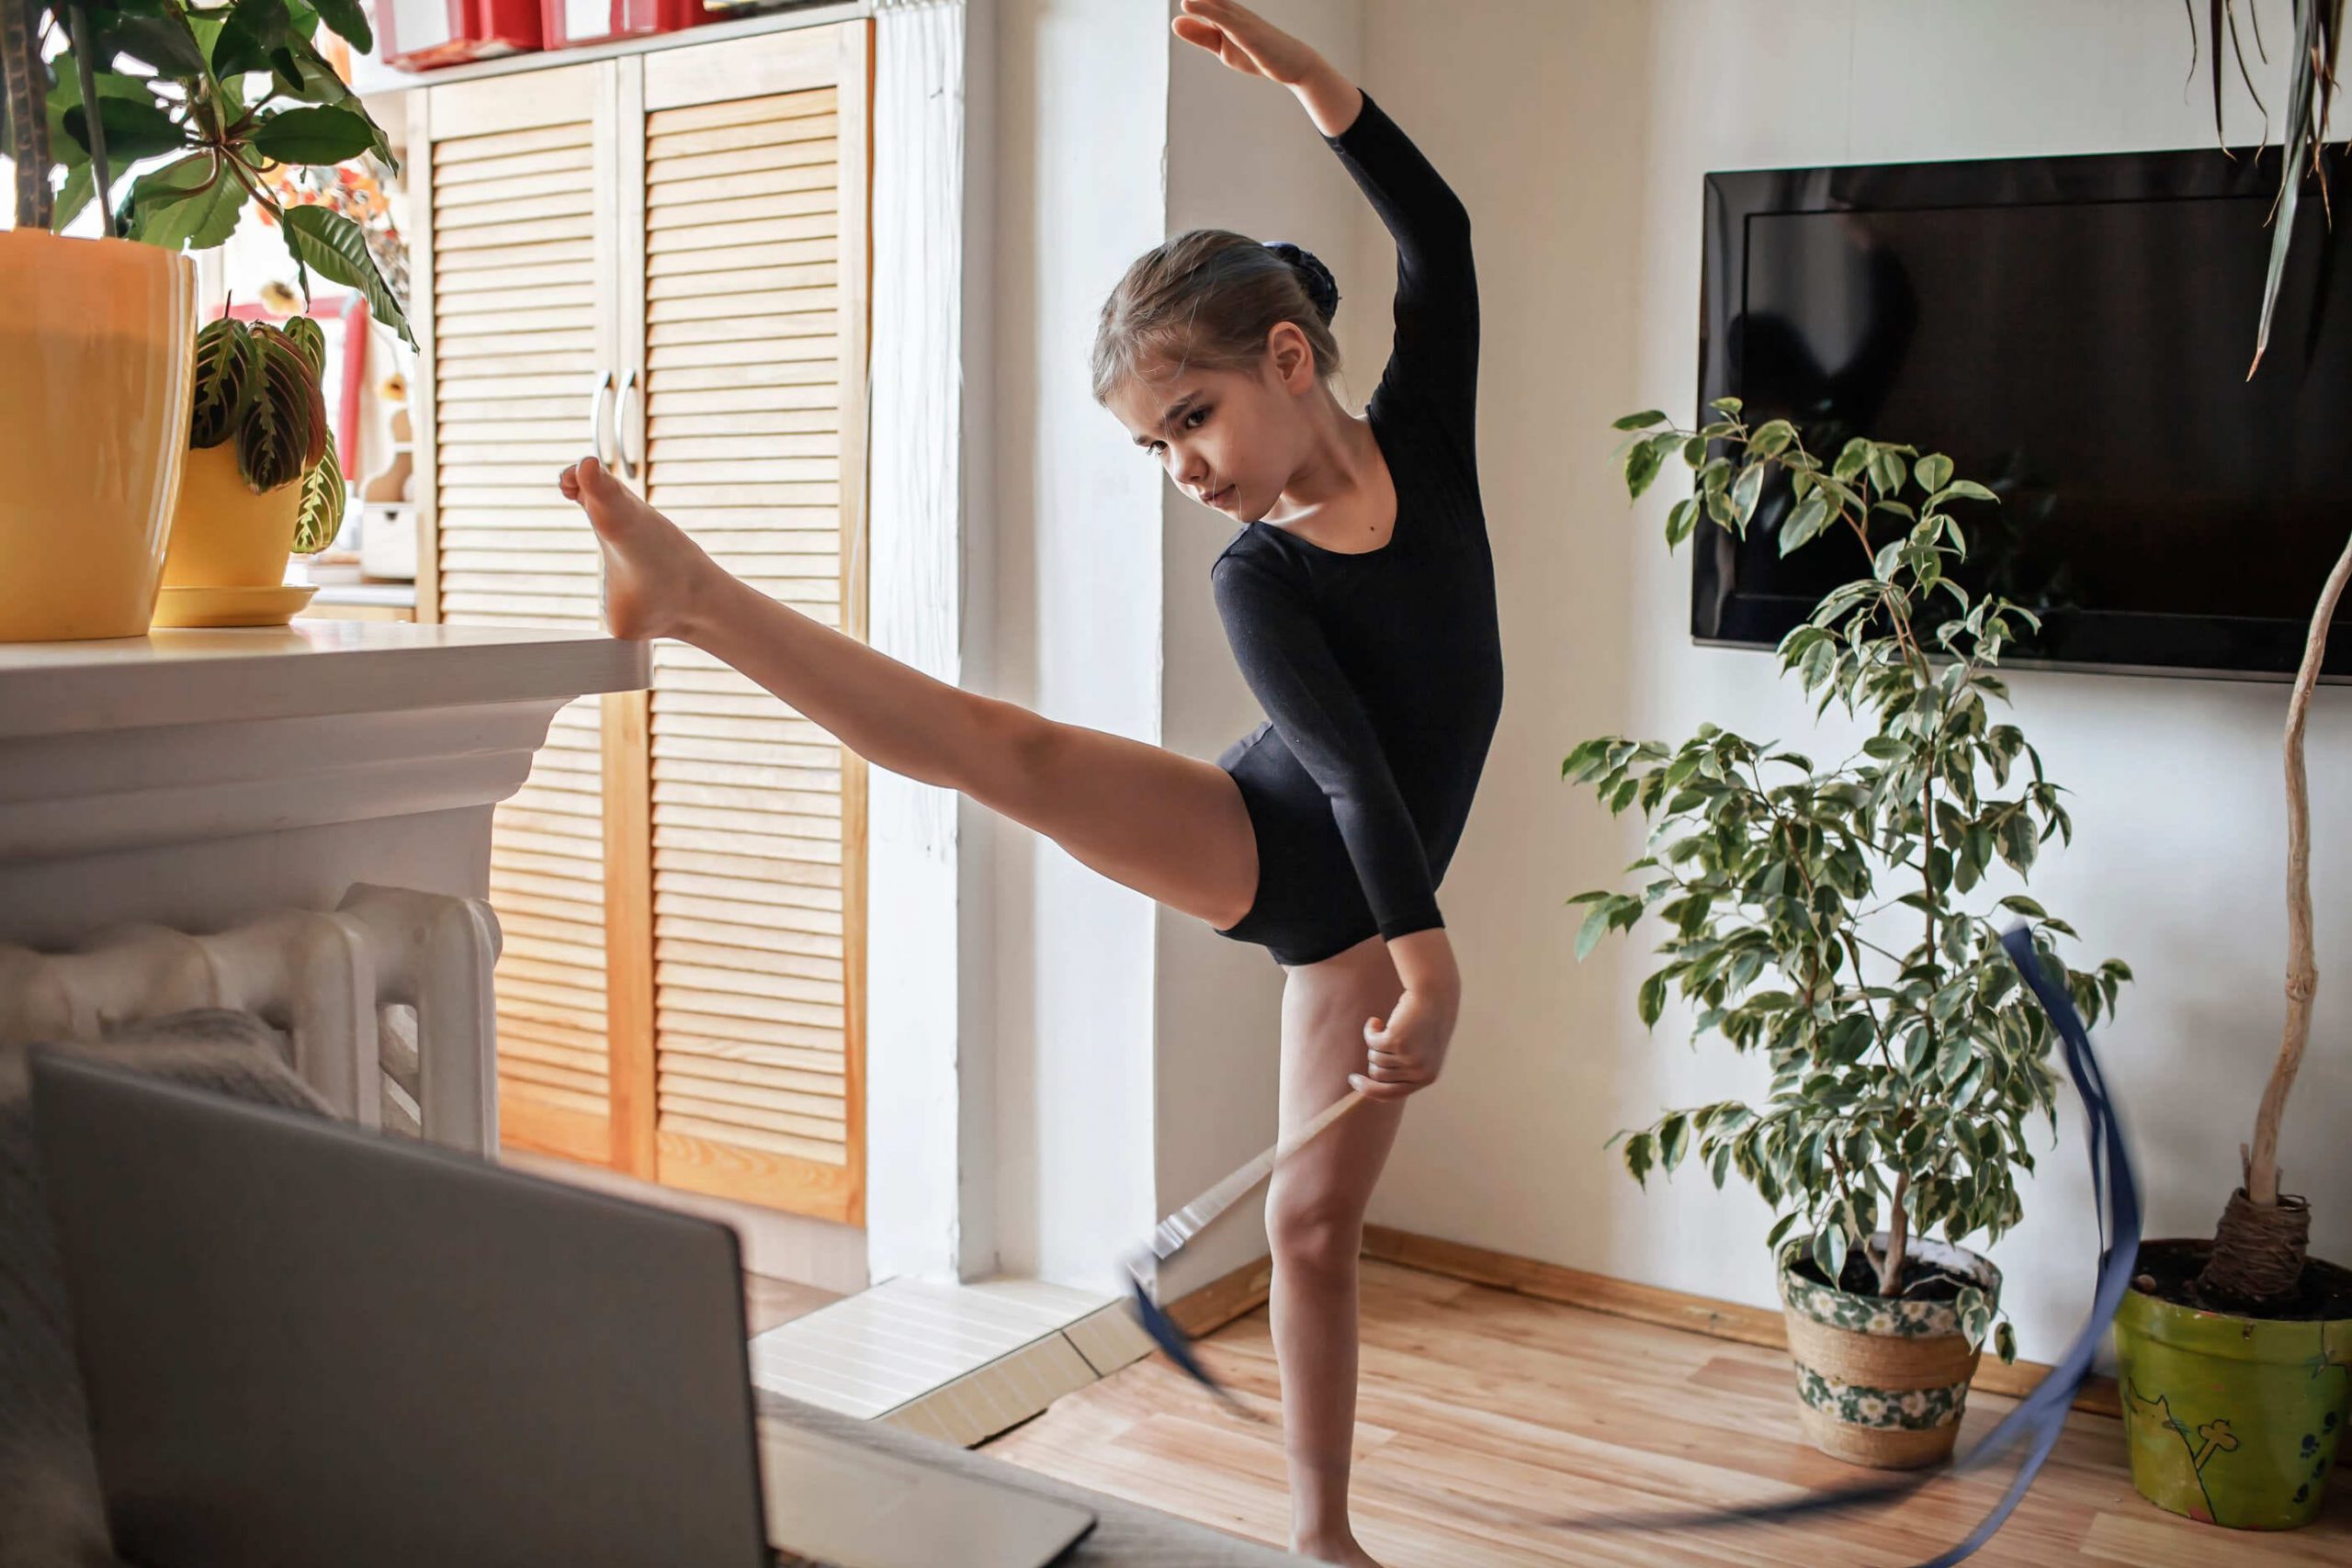 A young ballet dancer practicing at home, exhibiting poise and flexibility with a high leg extension. The room is bright and cozy, with houseplants and a TV in the background, indicative of a comfortable, personal space adapted for dance practice.